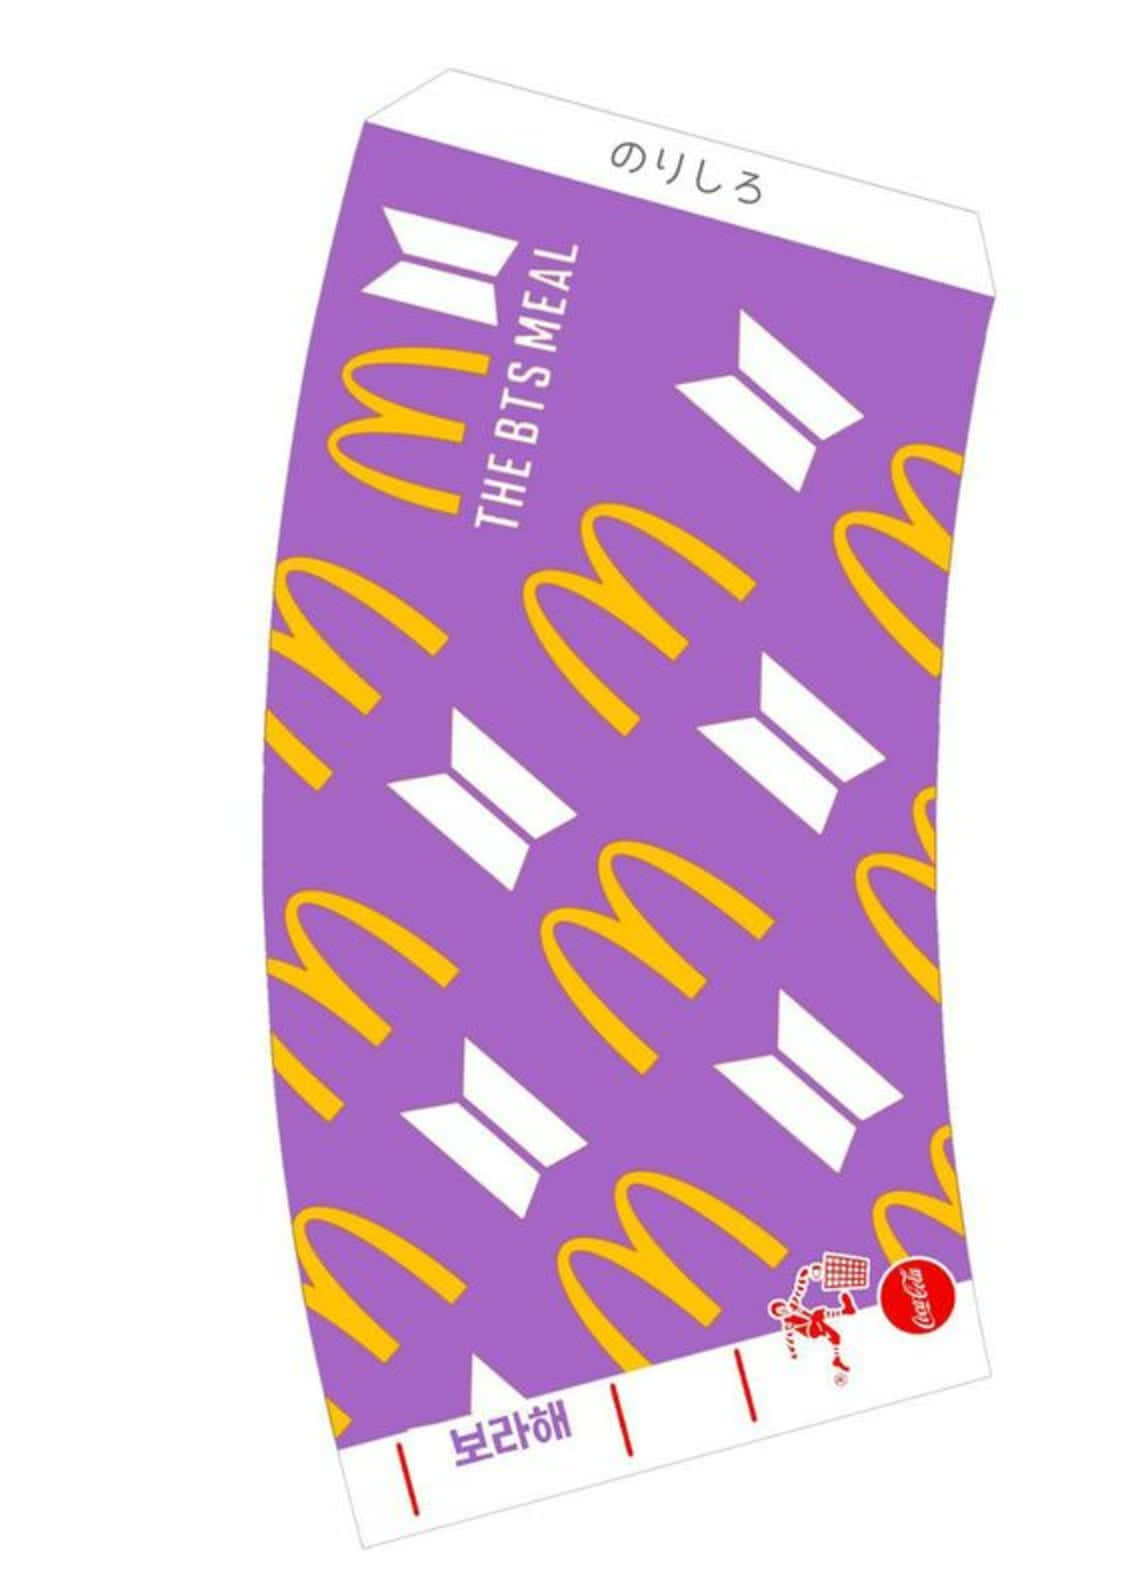 Mcdonald's Purple Ticket With Yellow And White Designs Wallpaper